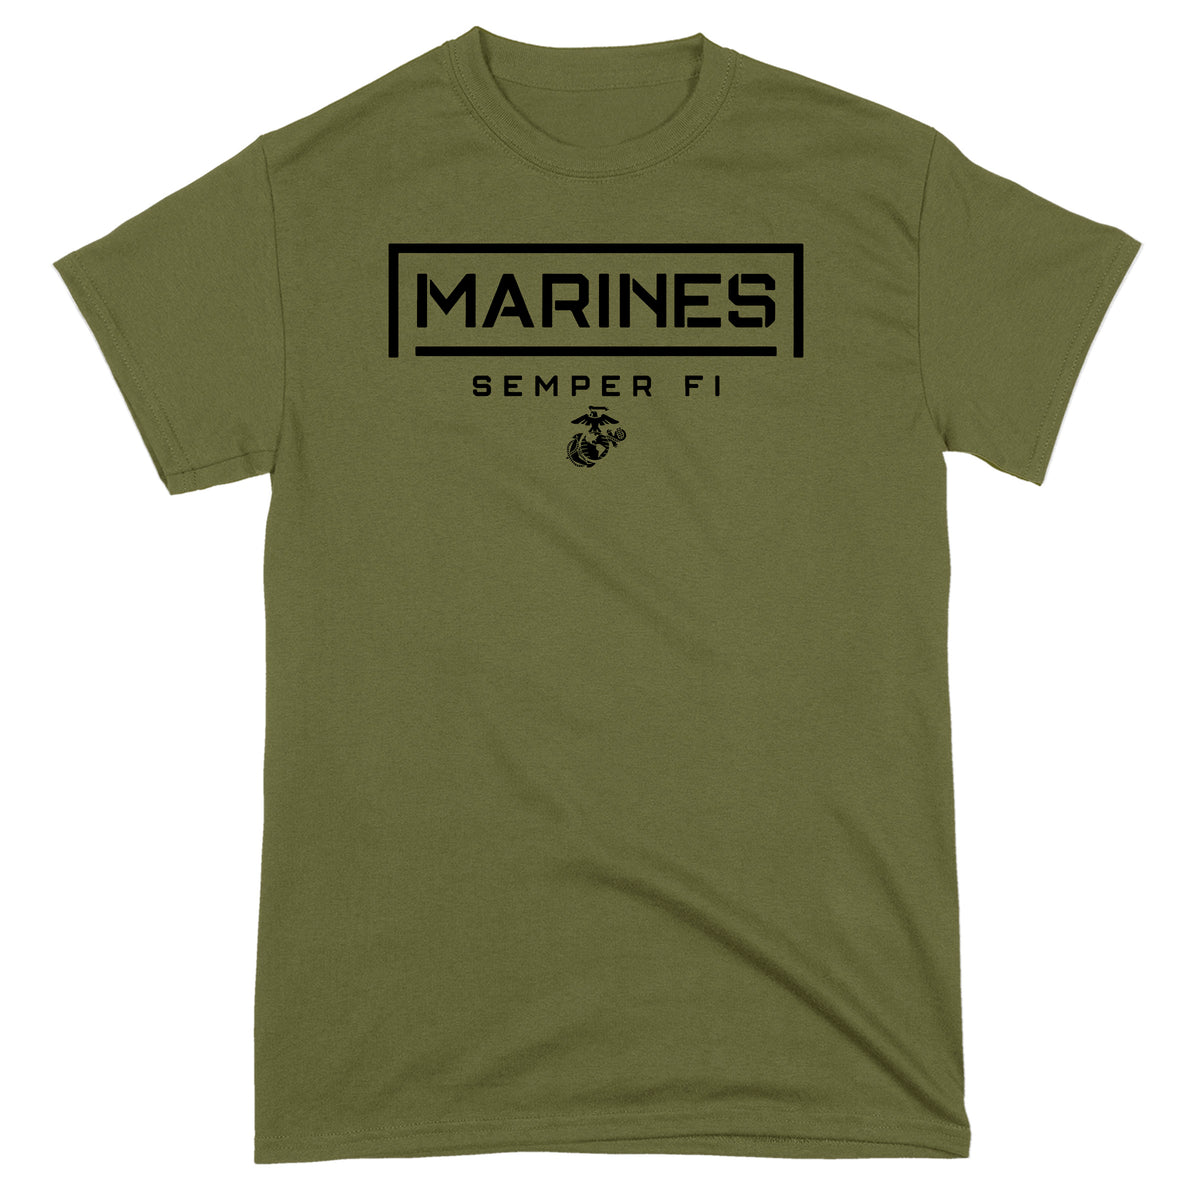 Marines "THE OUTPOST" Tee